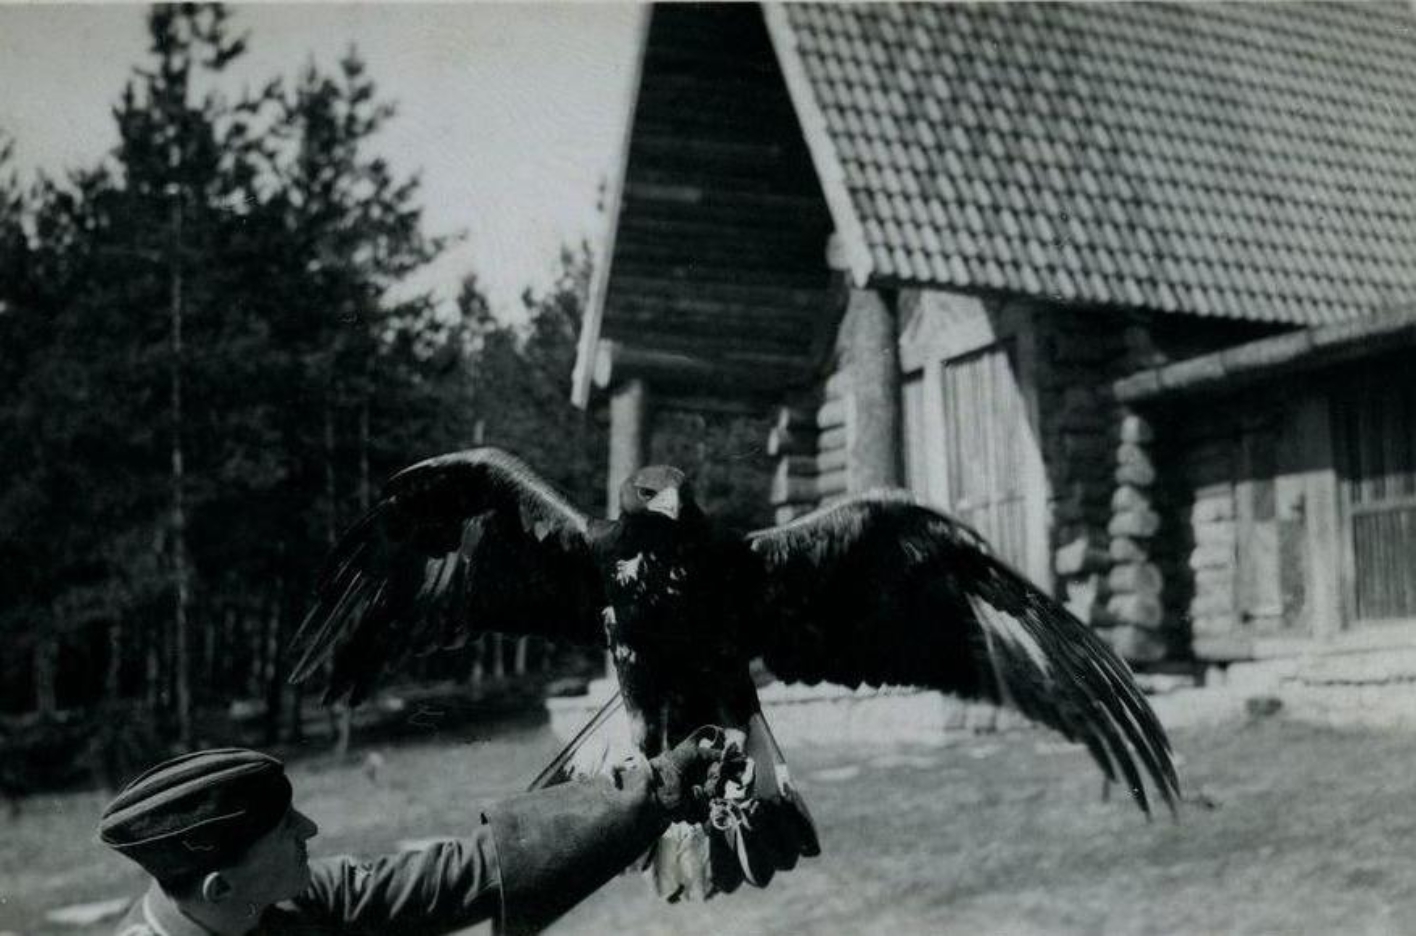 The falconer, SS-Scharführer Horst Mauersberger, during a demonstration of a golden eagle at Falkenhof Buchenwald. The bird is sitting on the falconer's glove and has spread its wings. In the background the chimney hall.